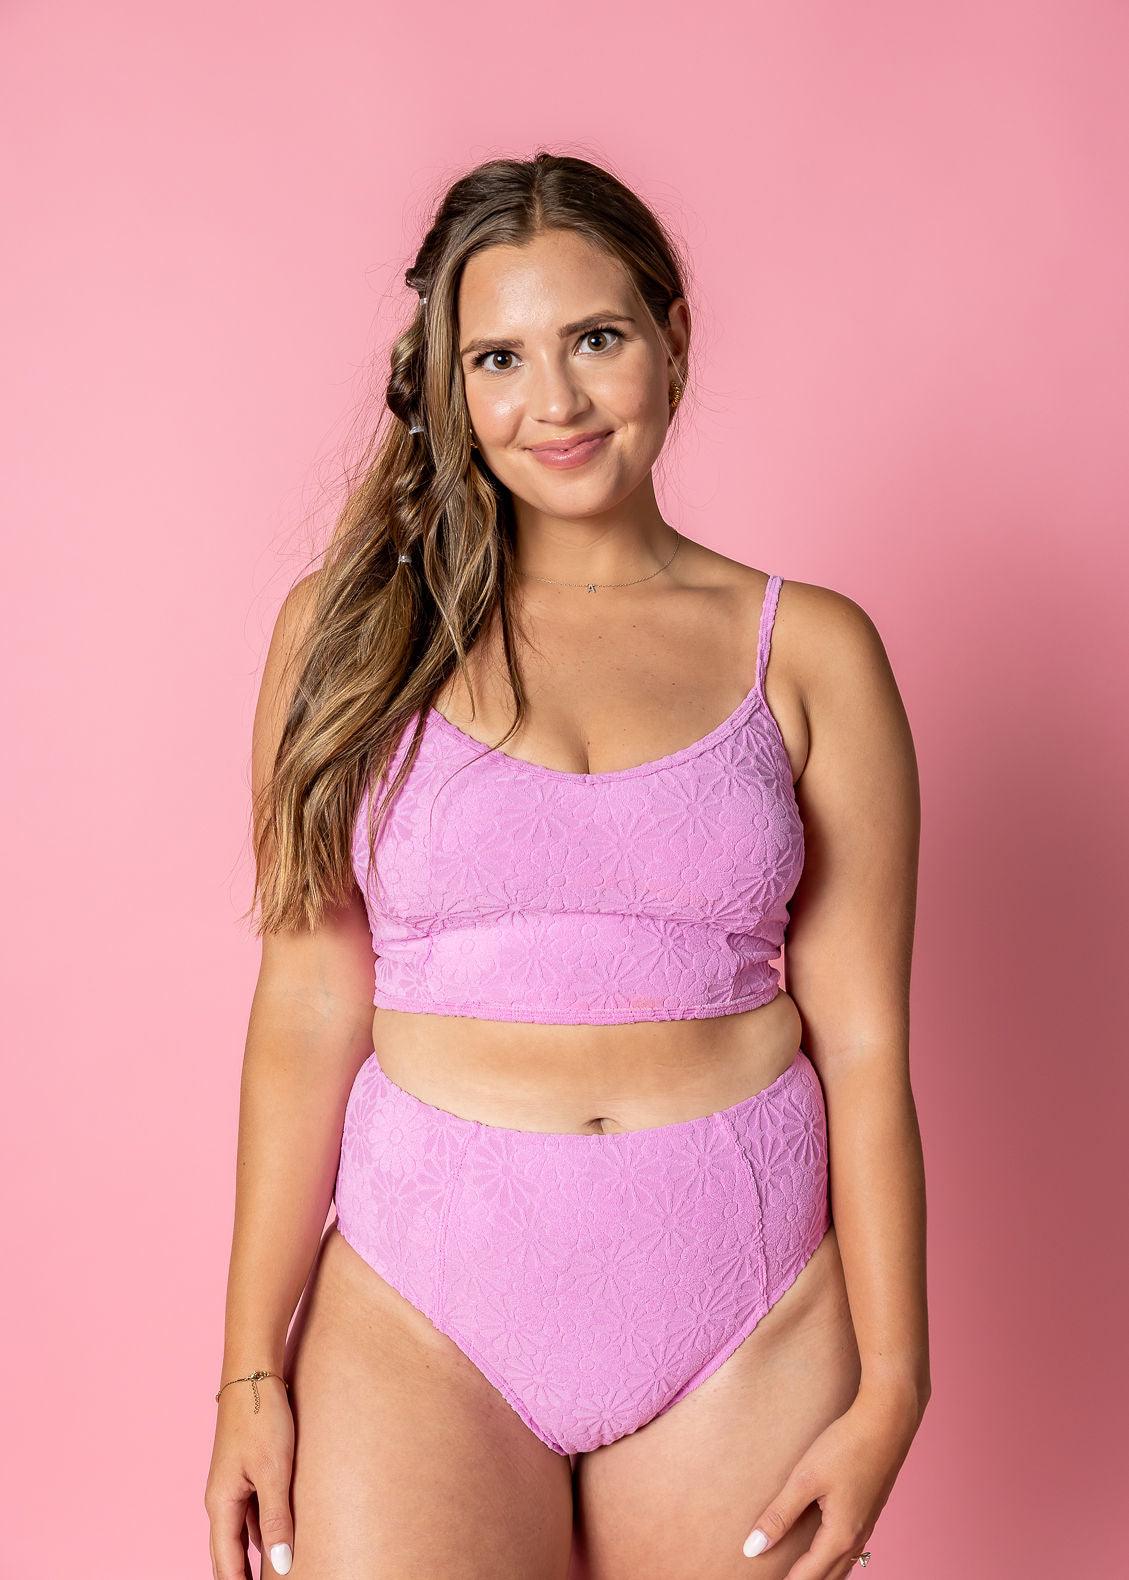 Crop Top Swimsuit - Textured Orchid Daisy